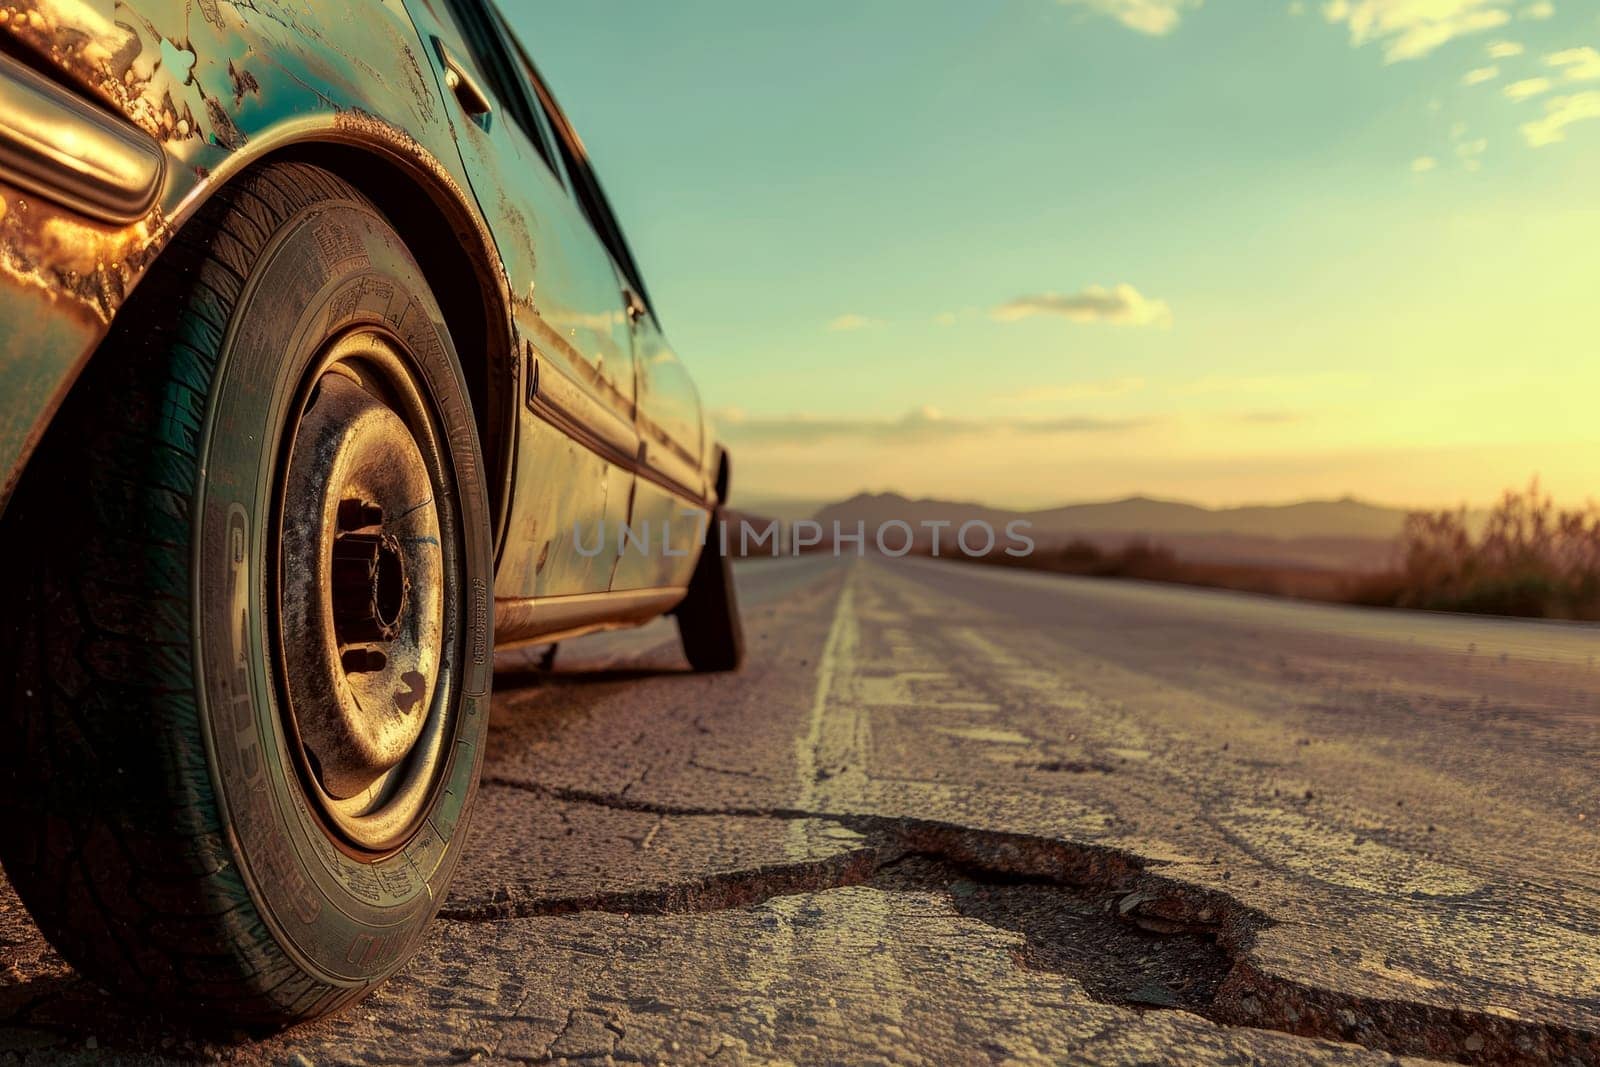 A car tire is shown on a road with a cracked surface.